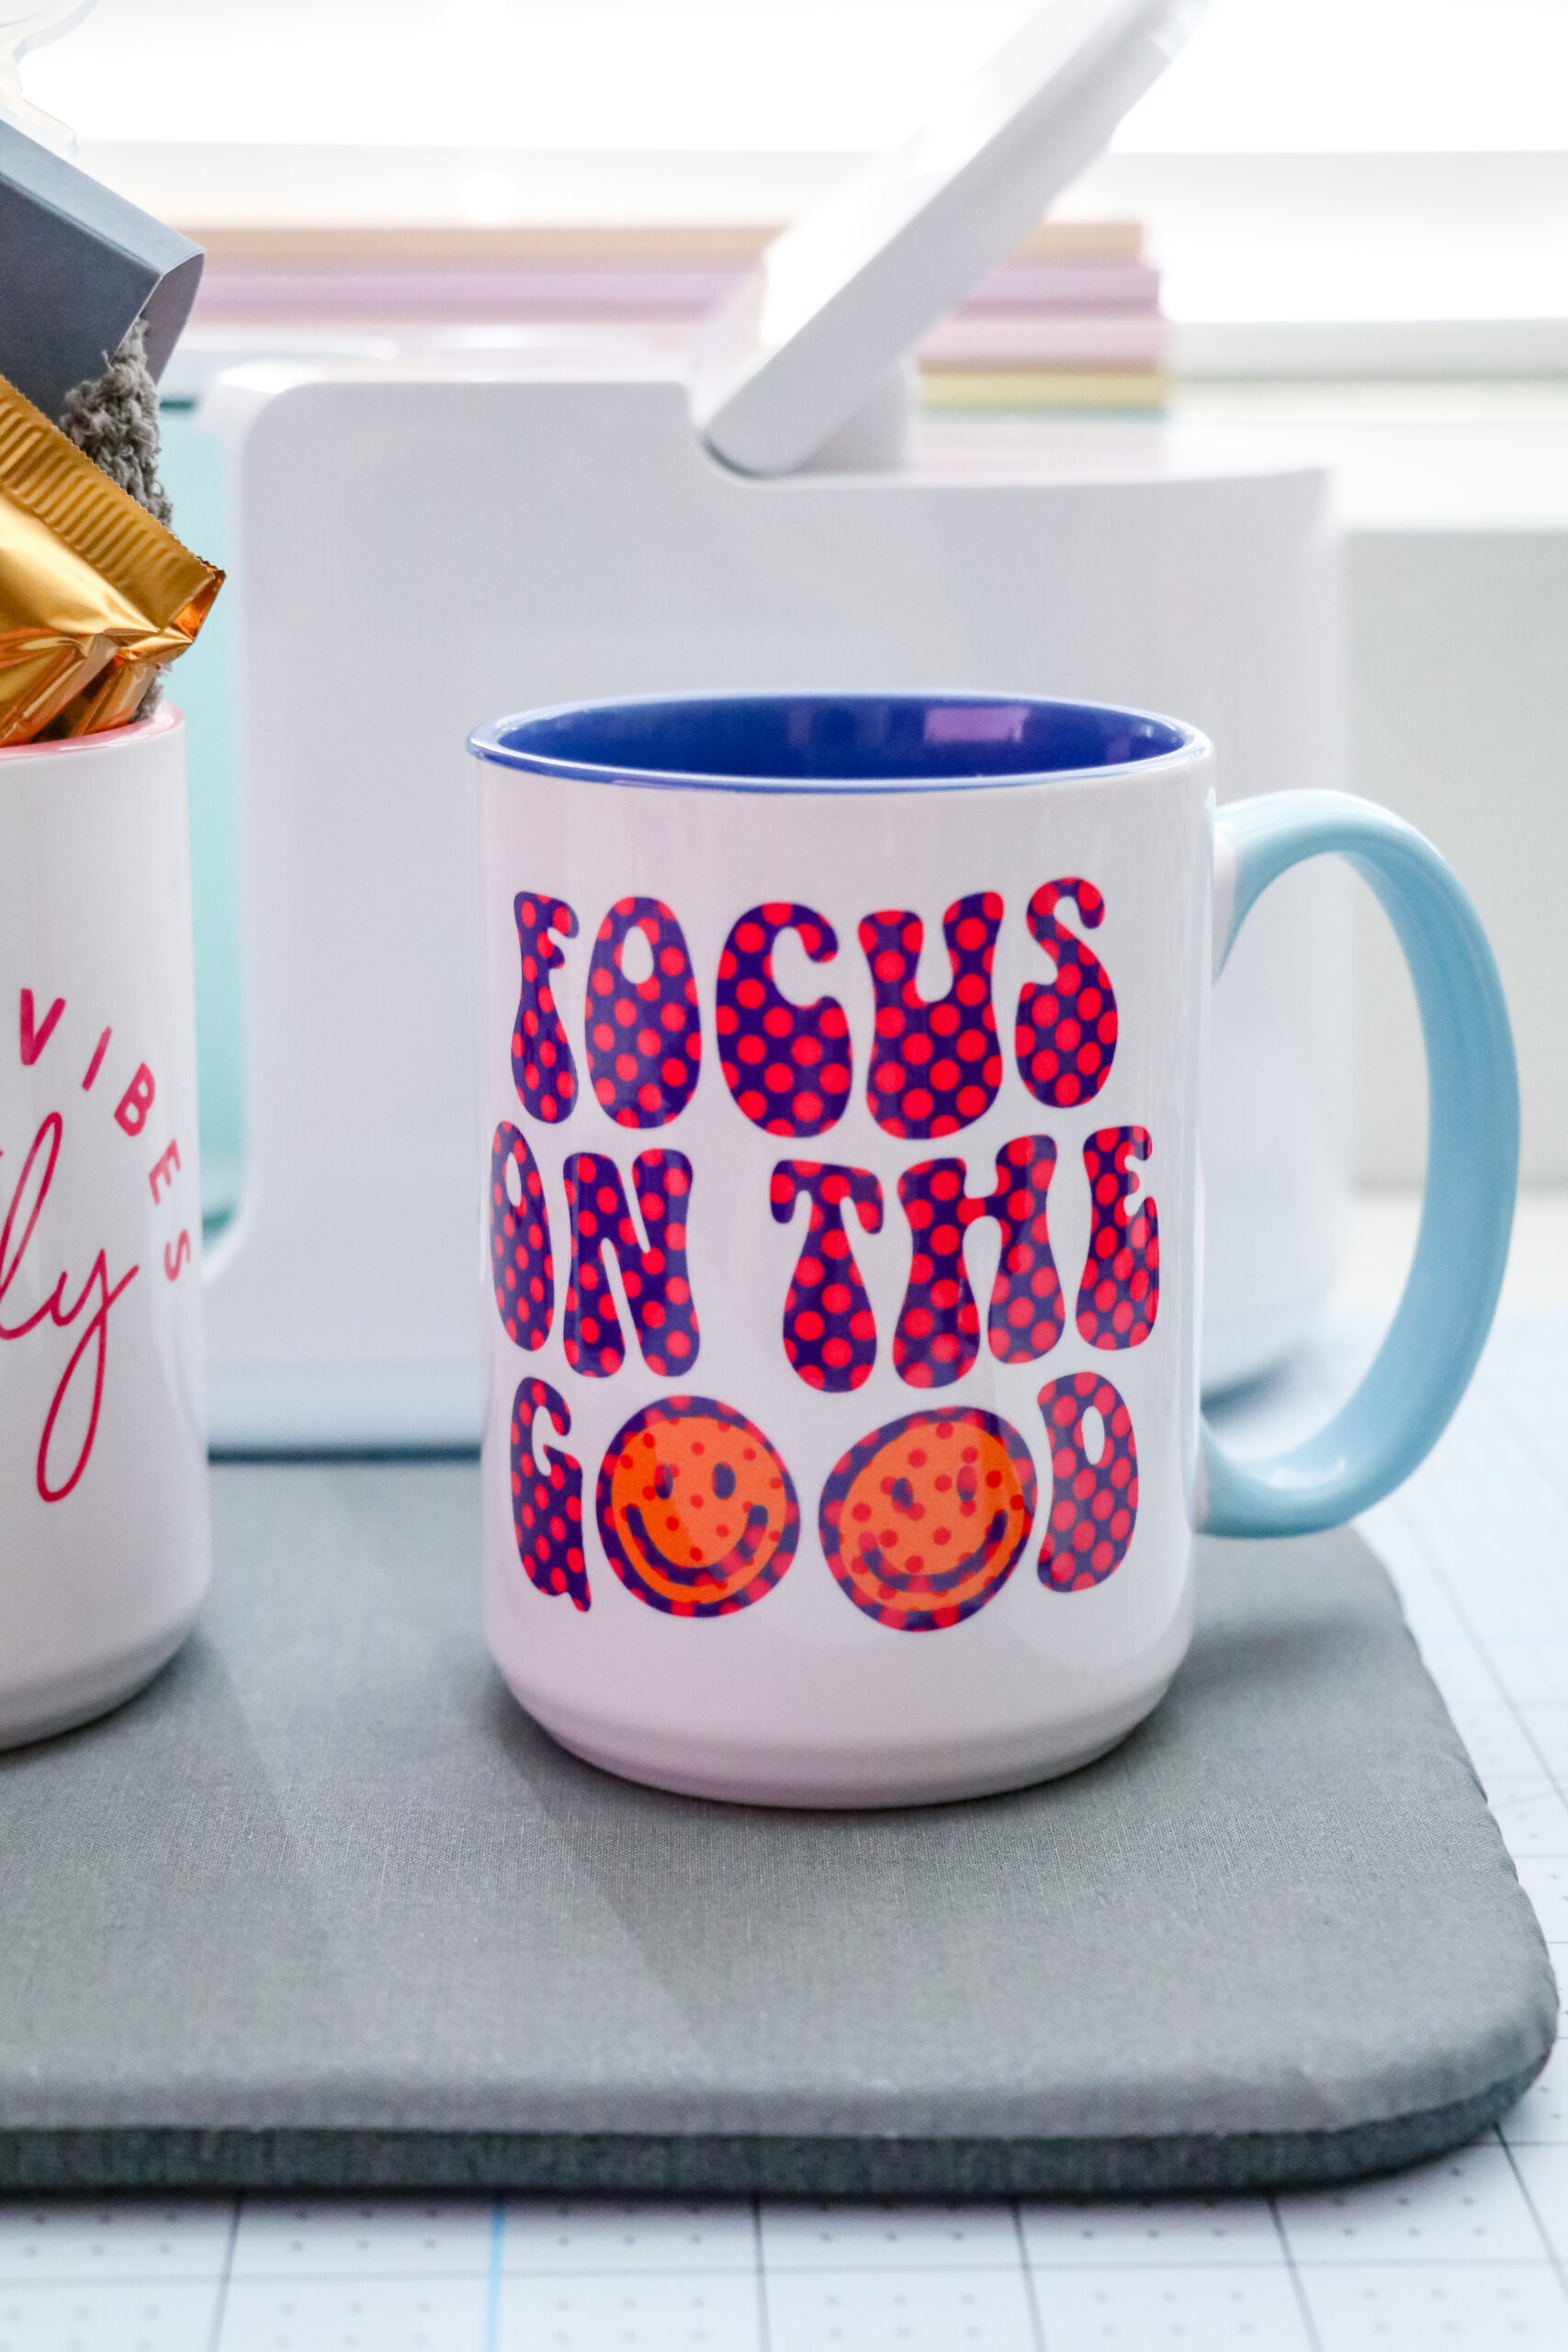 HOW TO PERSONALIZE MUGS WITH CRICUT